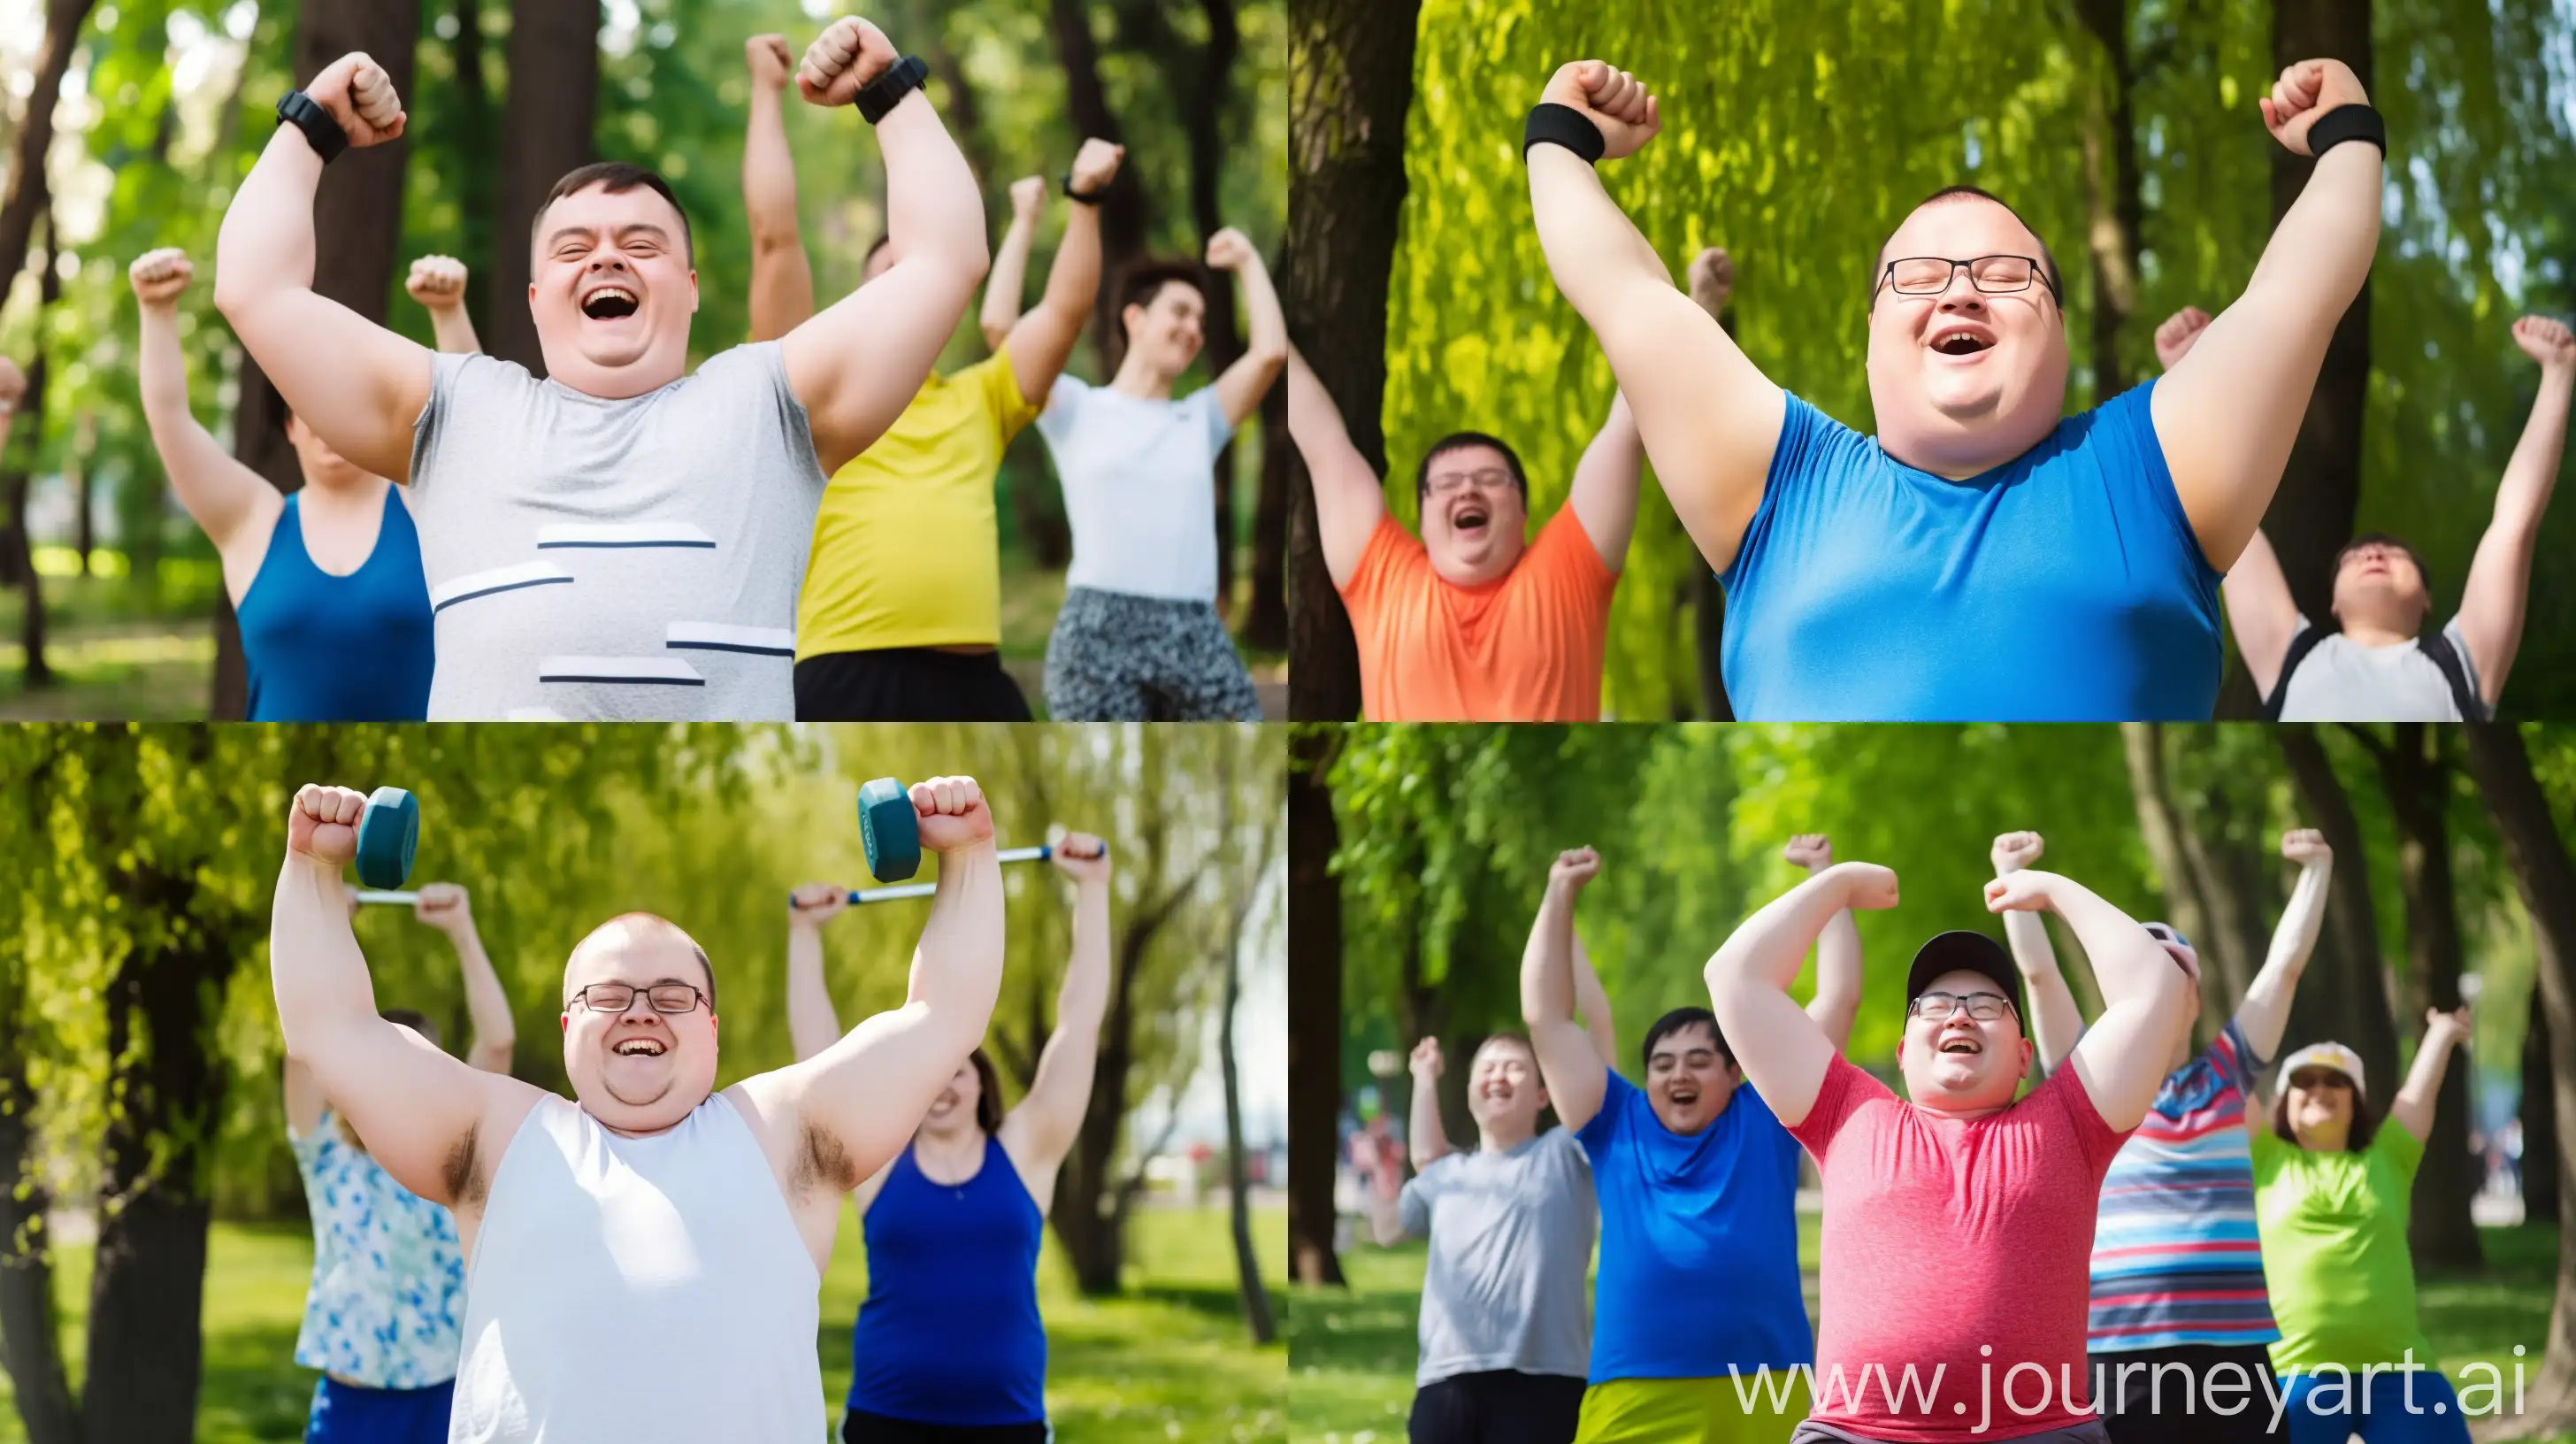 Down-Syndrome-Patient-Exercising-with-Friends-in-Vibrant-Park-Setting